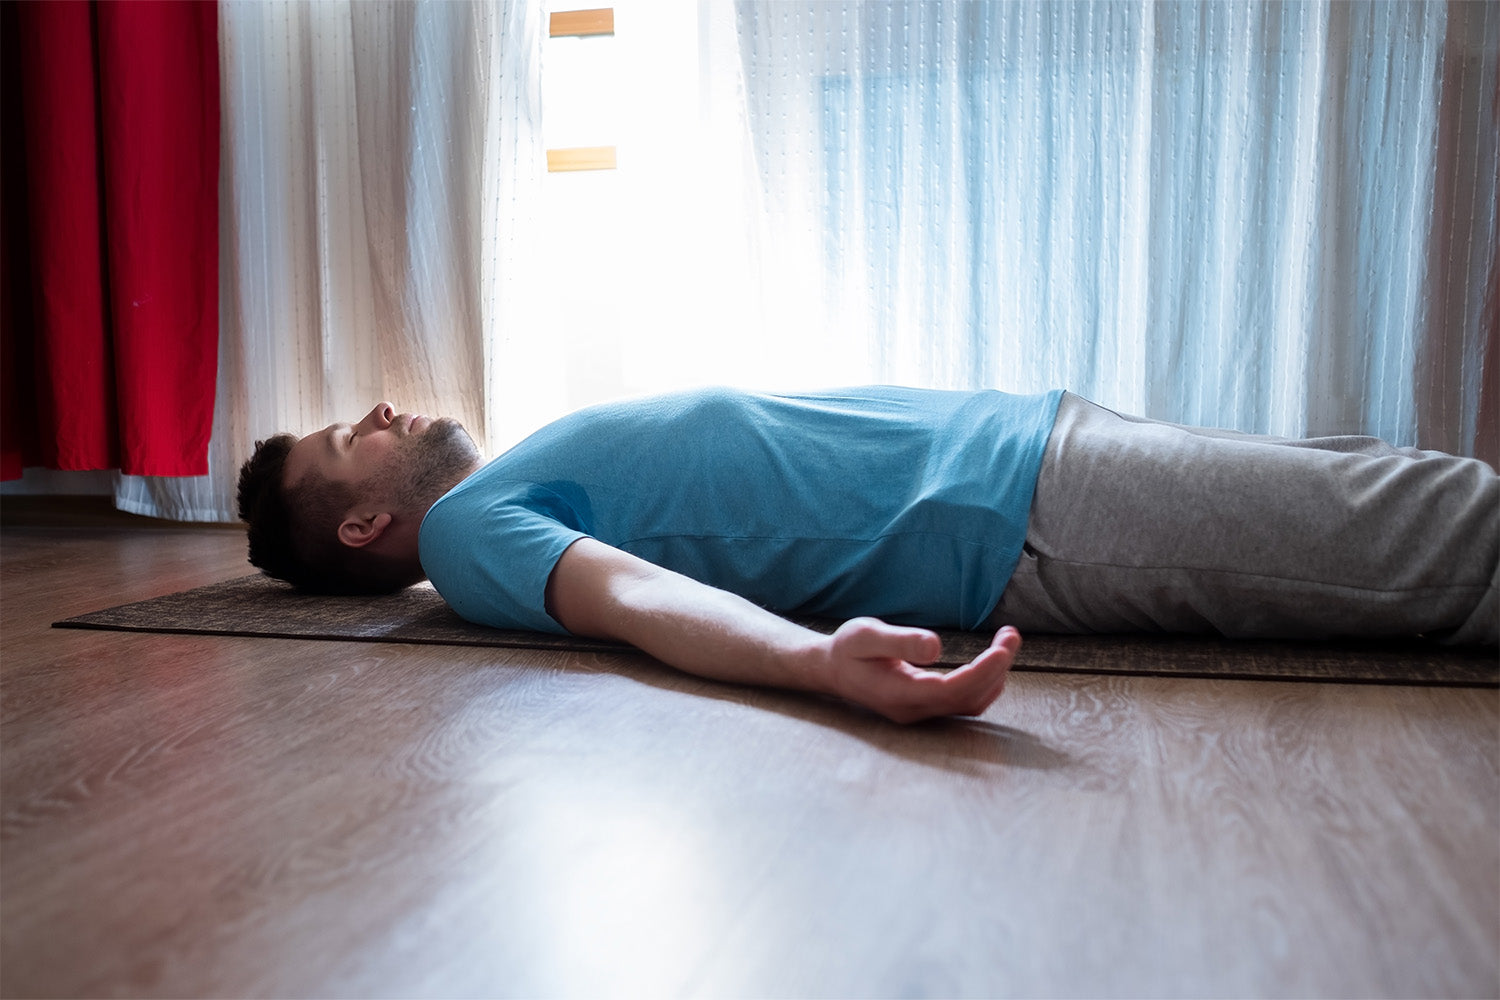 Is sleeping on the floor actually good for your back? Experts weigh in -  National